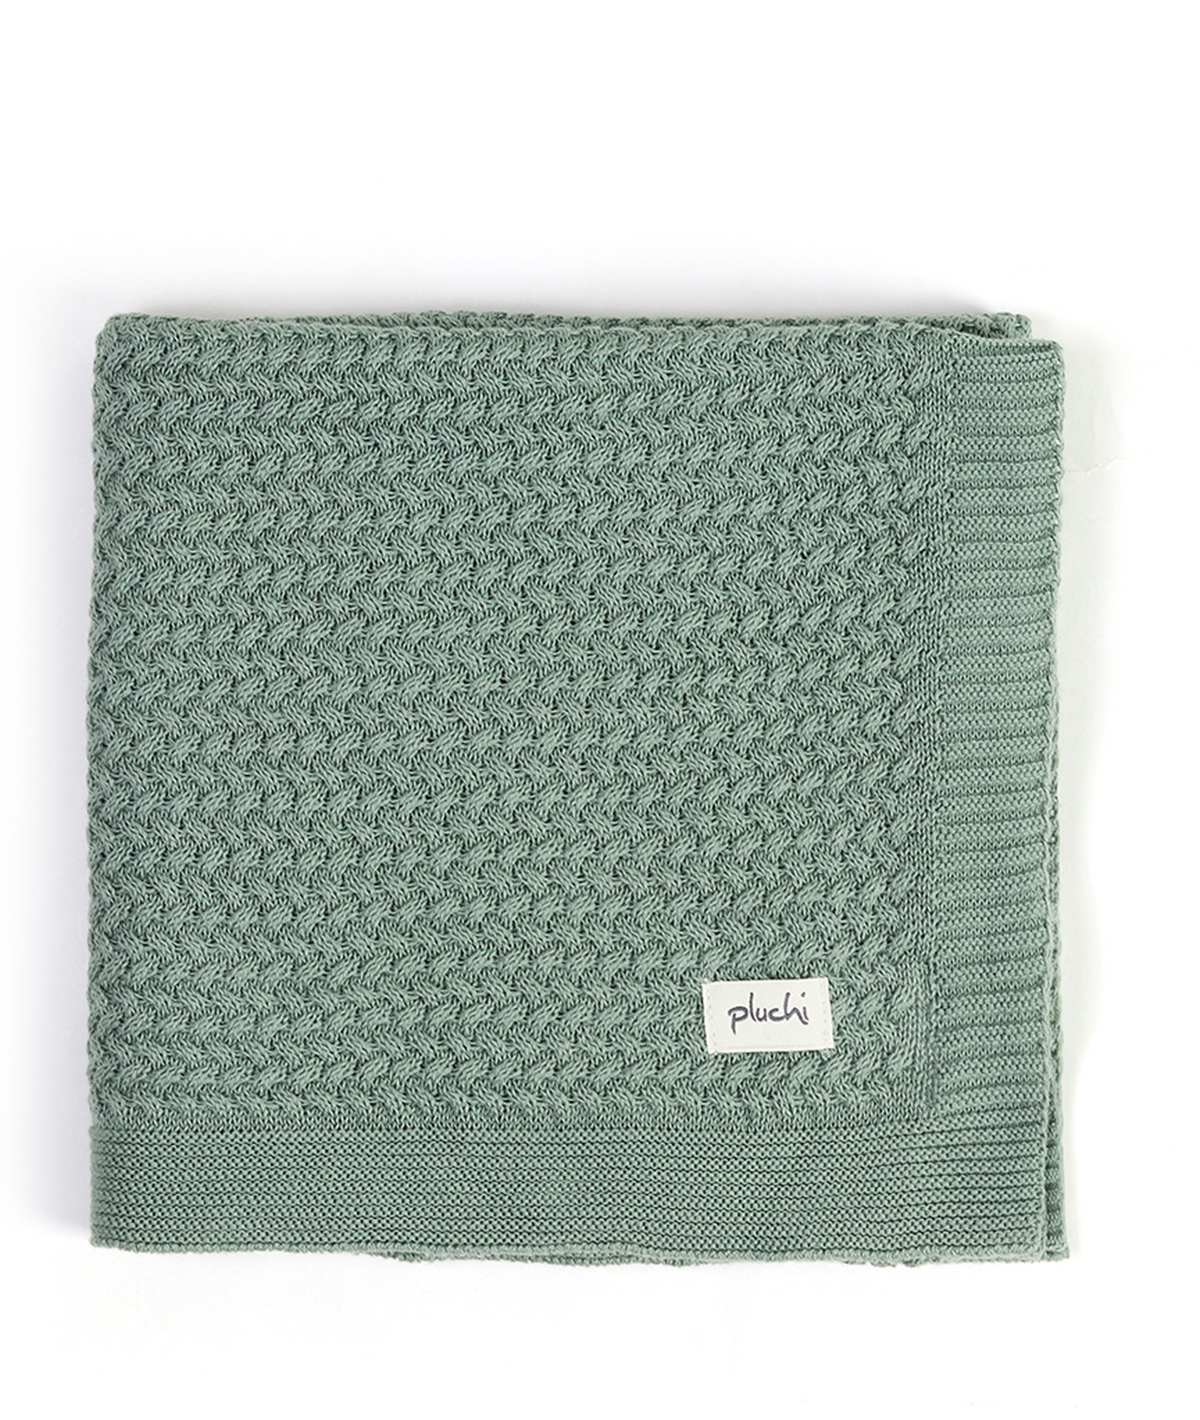 Giggle Knit  Indus Blue Color Cotton Knitted Ac Blanket For Baby / Infant / New Born For Use In All Seasons